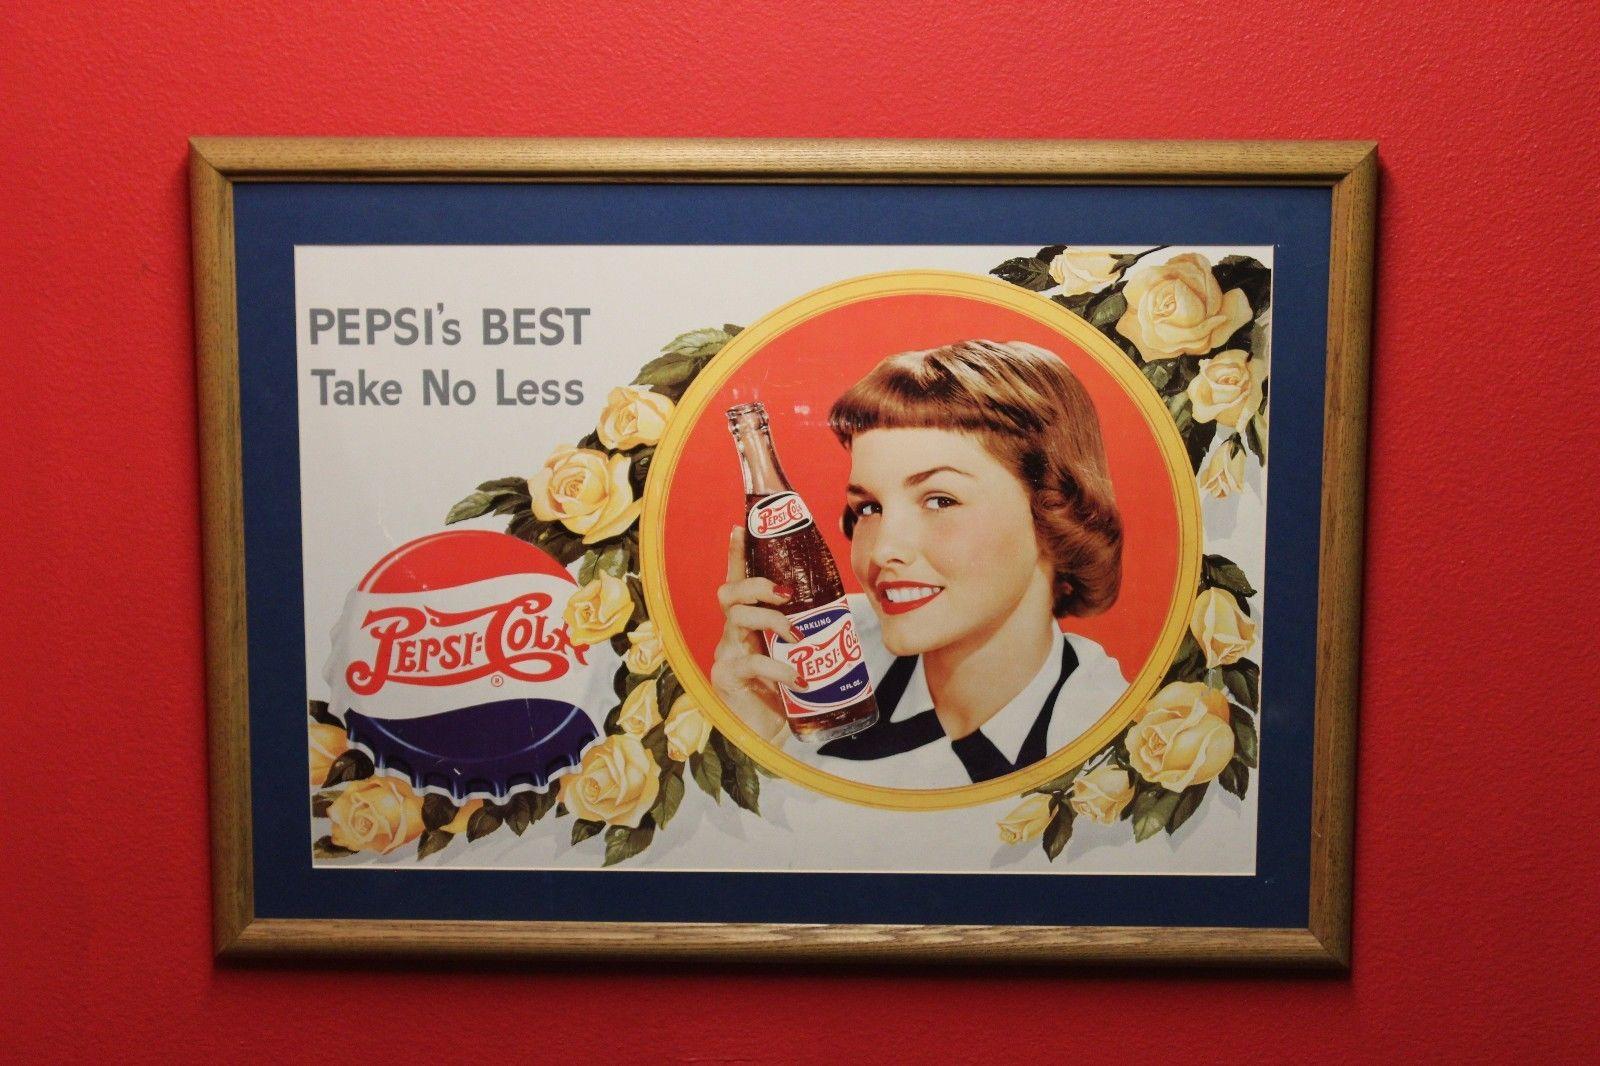 1940s classic pinup advertising for Pepsi-Cola.